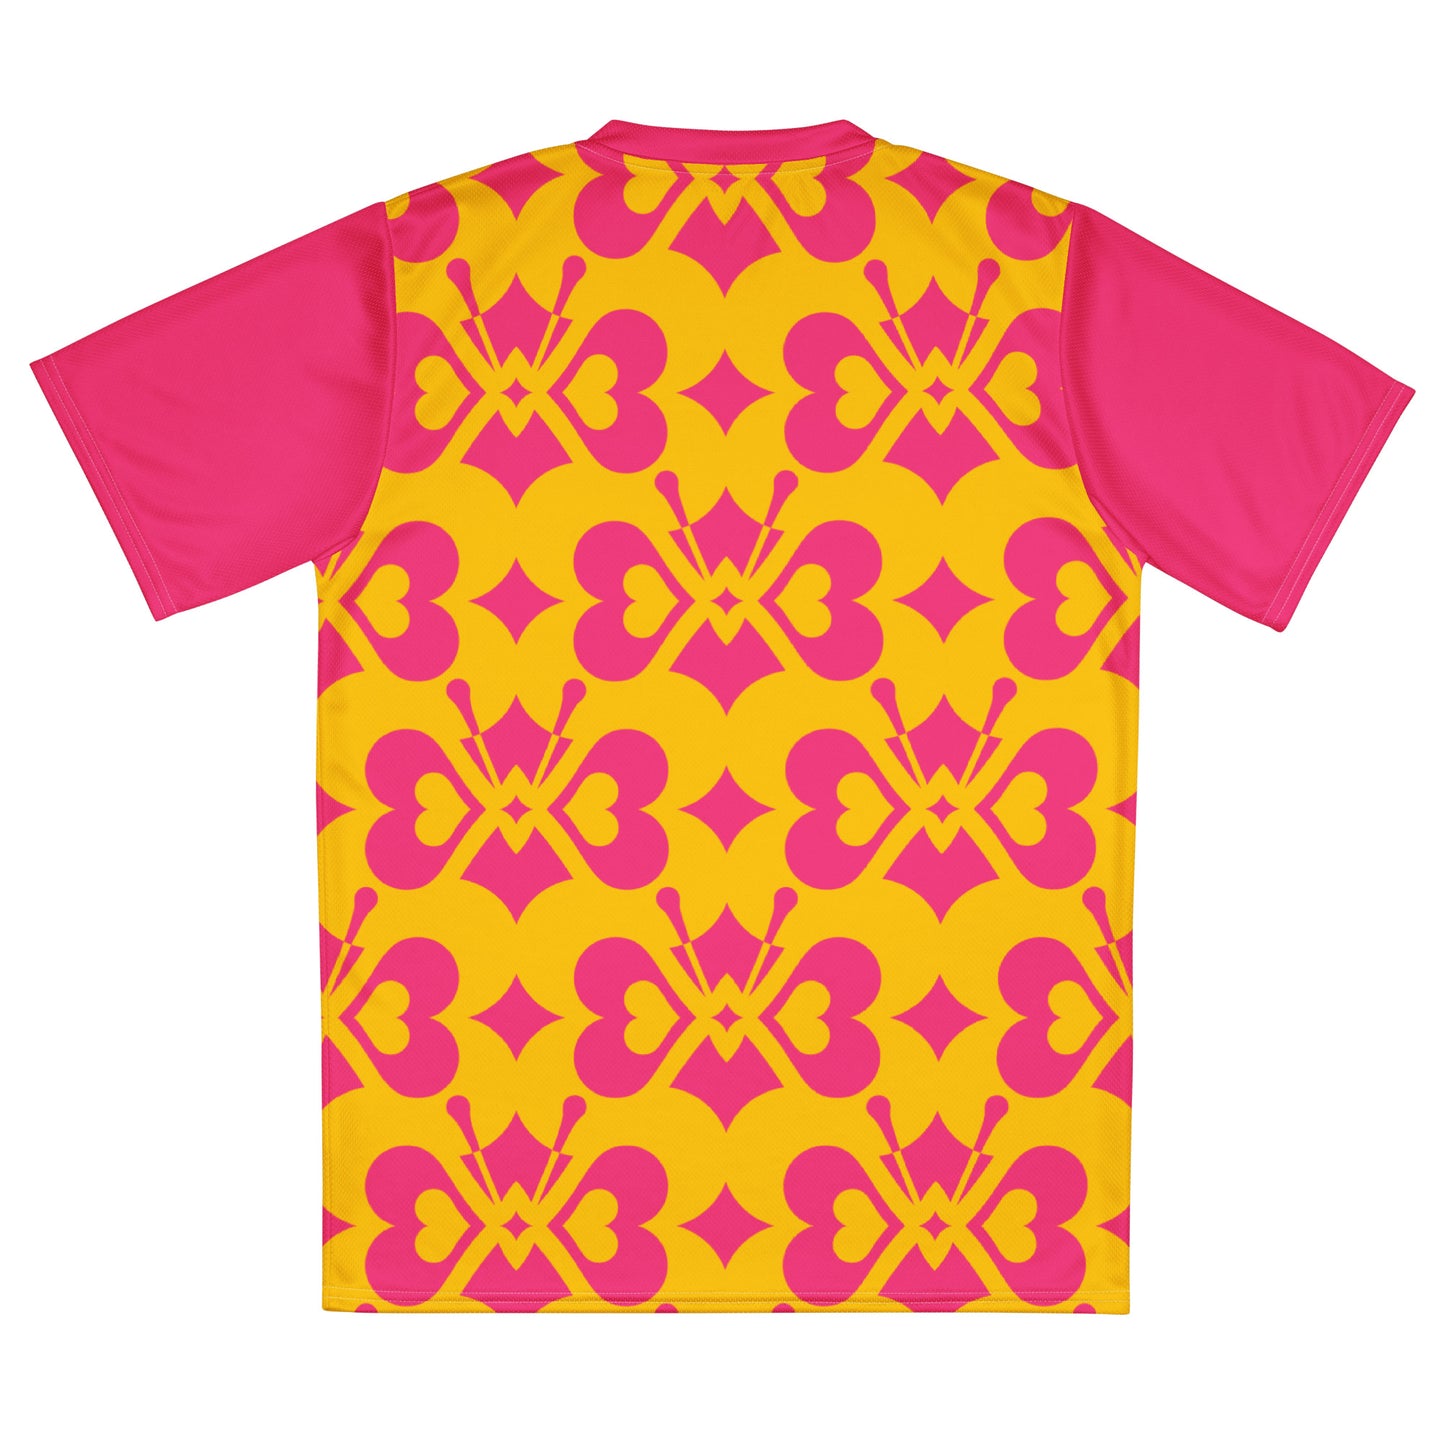 LOVE BUTTERFLY yellow pink - Recycled unisex sports jersey